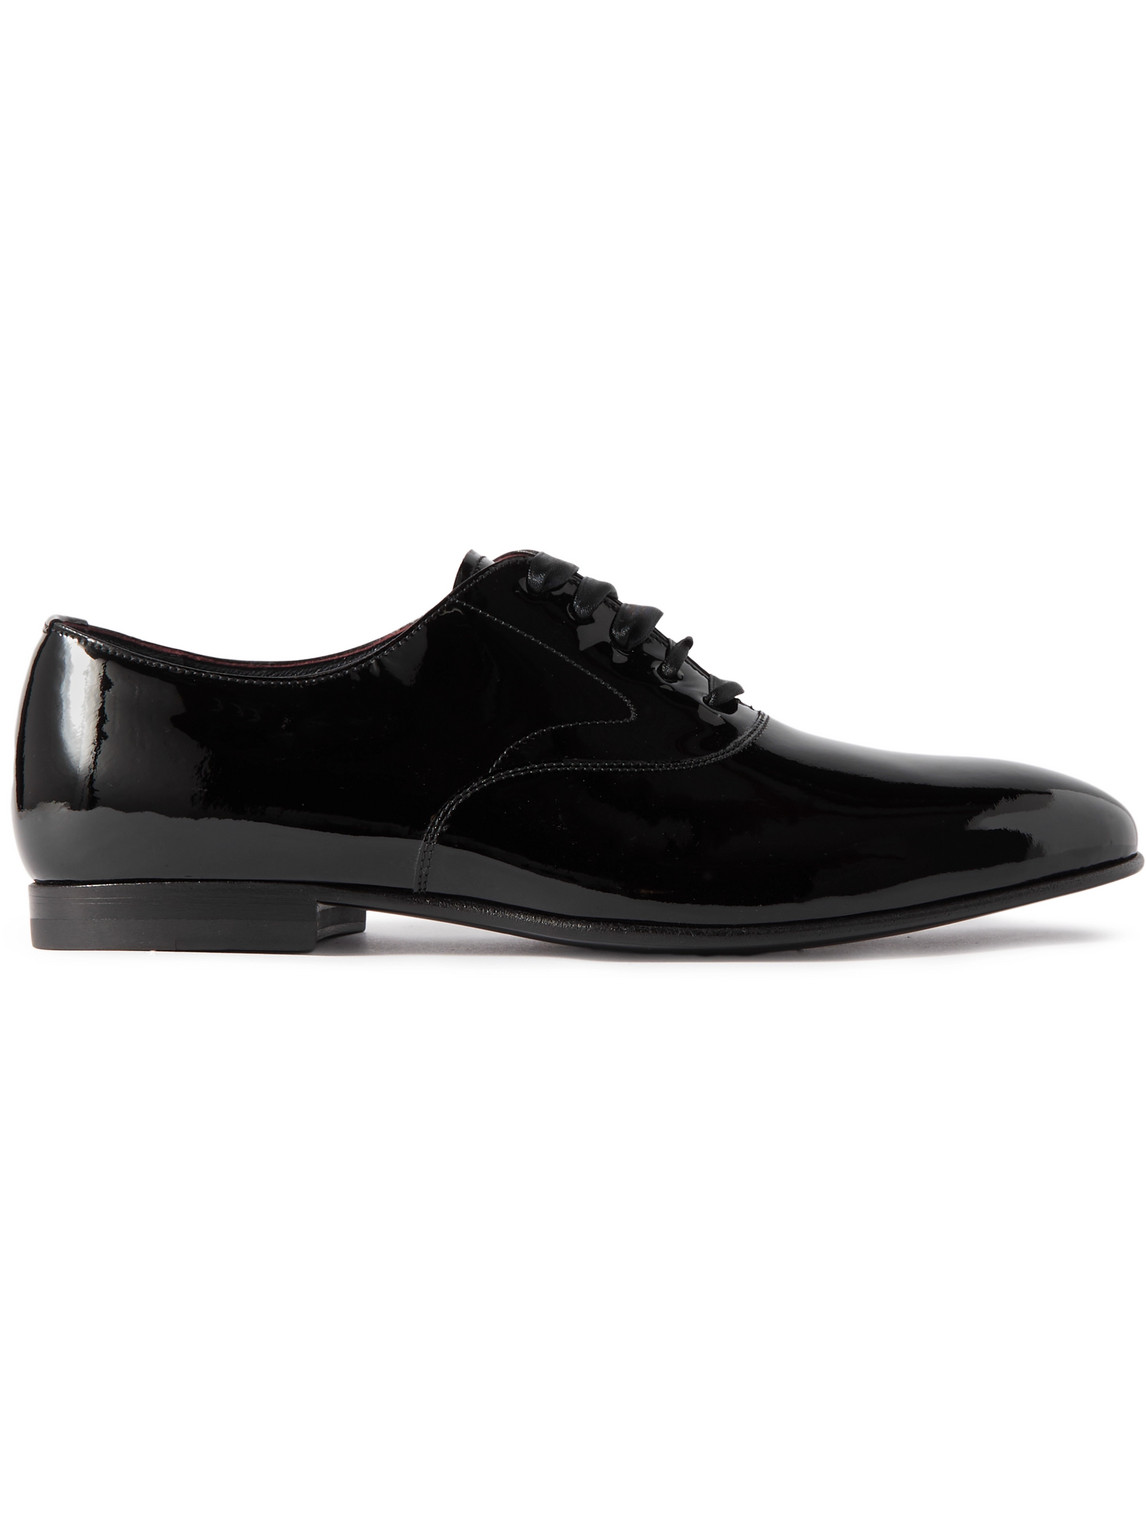 Paget II Patent-Leather Oxford Shoes